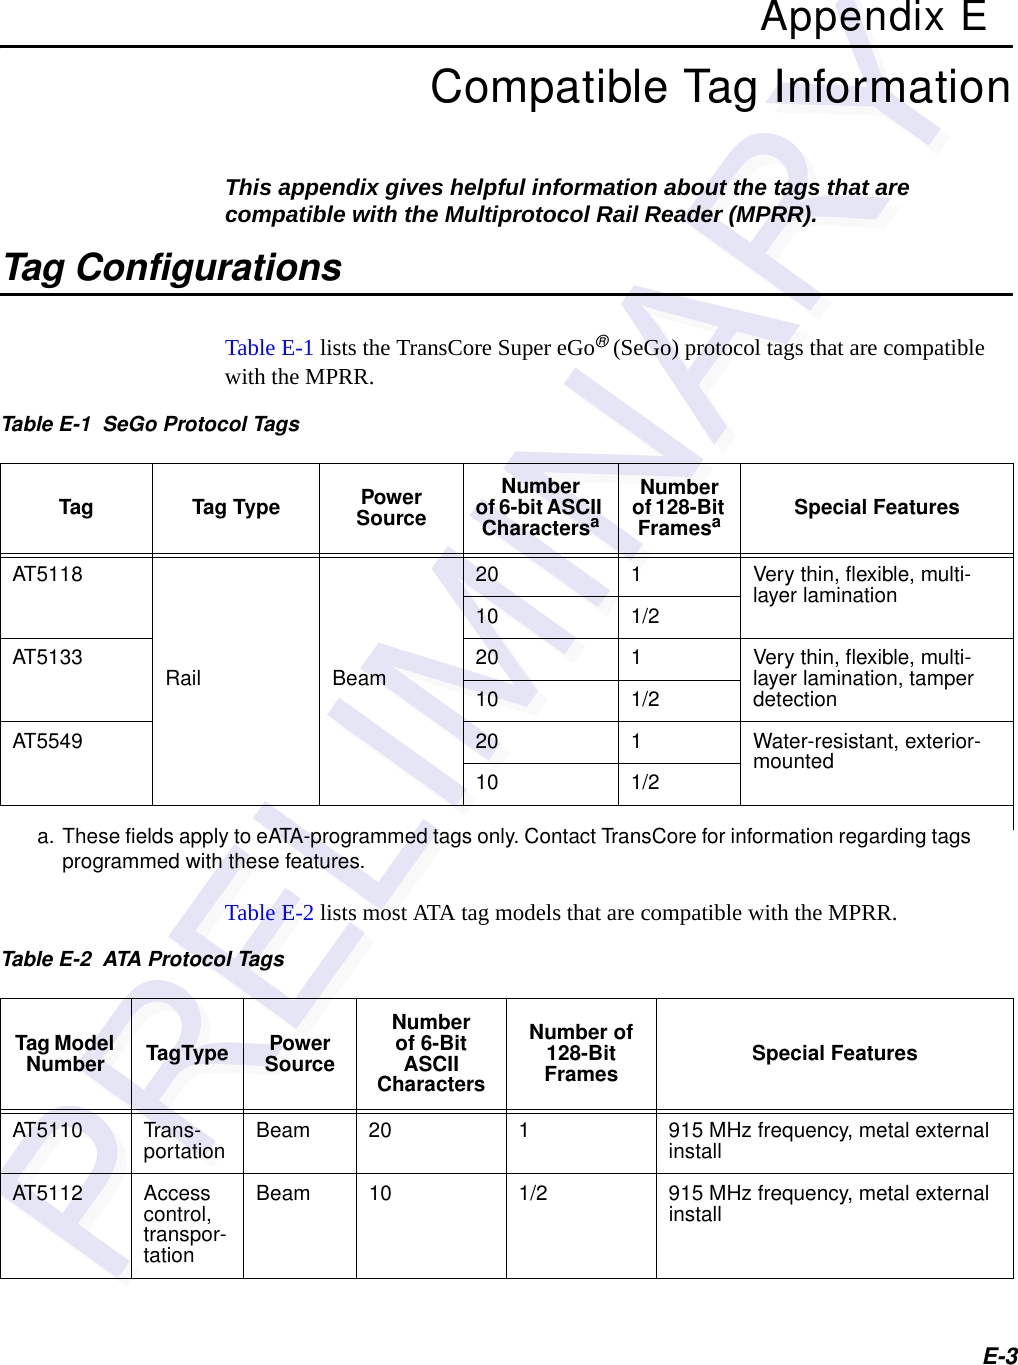 E-3Appendix ECompatible Tag InformationThis appendix gives helpful information about the tags that are compatible with the Multiprotocol Rail Reader (MPRR).Tag ConfigurationsTable E-1 lists the TransCore Super eGo® (SeGo) protocol tags that are compatible with the MPRR.Table E-2 lists most ATA tag models that are compatible with the MPRR. Table E-1  SeGo Protocol TagsTag Tag Type Power SourceNumber of 6-bit ASCII CharactersaNumber of 128-Bit FramesaSpecial FeaturesAT5118Rail Beam20 1 Very thin, flexible, multi-layer lamination10 1/2AT5133 20 1 Very thin, flexible, multi-layer lamination, tamper detection10 1/2AT5549 20 1 Water-resistant, exterior-mounted10 1/2a. These fields apply to eATA-programmed tags only. Contact TransCore for information regarding tags programmed with these features.Table E-2  ATA Protocol TagsTag Model Number TagType Power SourceNumber of 6-Bit ASCIICharactersNumber of 128-Bit Frames Special FeaturesAT5110 Trans-portation Beam 20 1 915 MHz frequency, metal external installAT5112 Access control, transpor-tationBeam 10 1/2 915 MHz frequency, metal external install